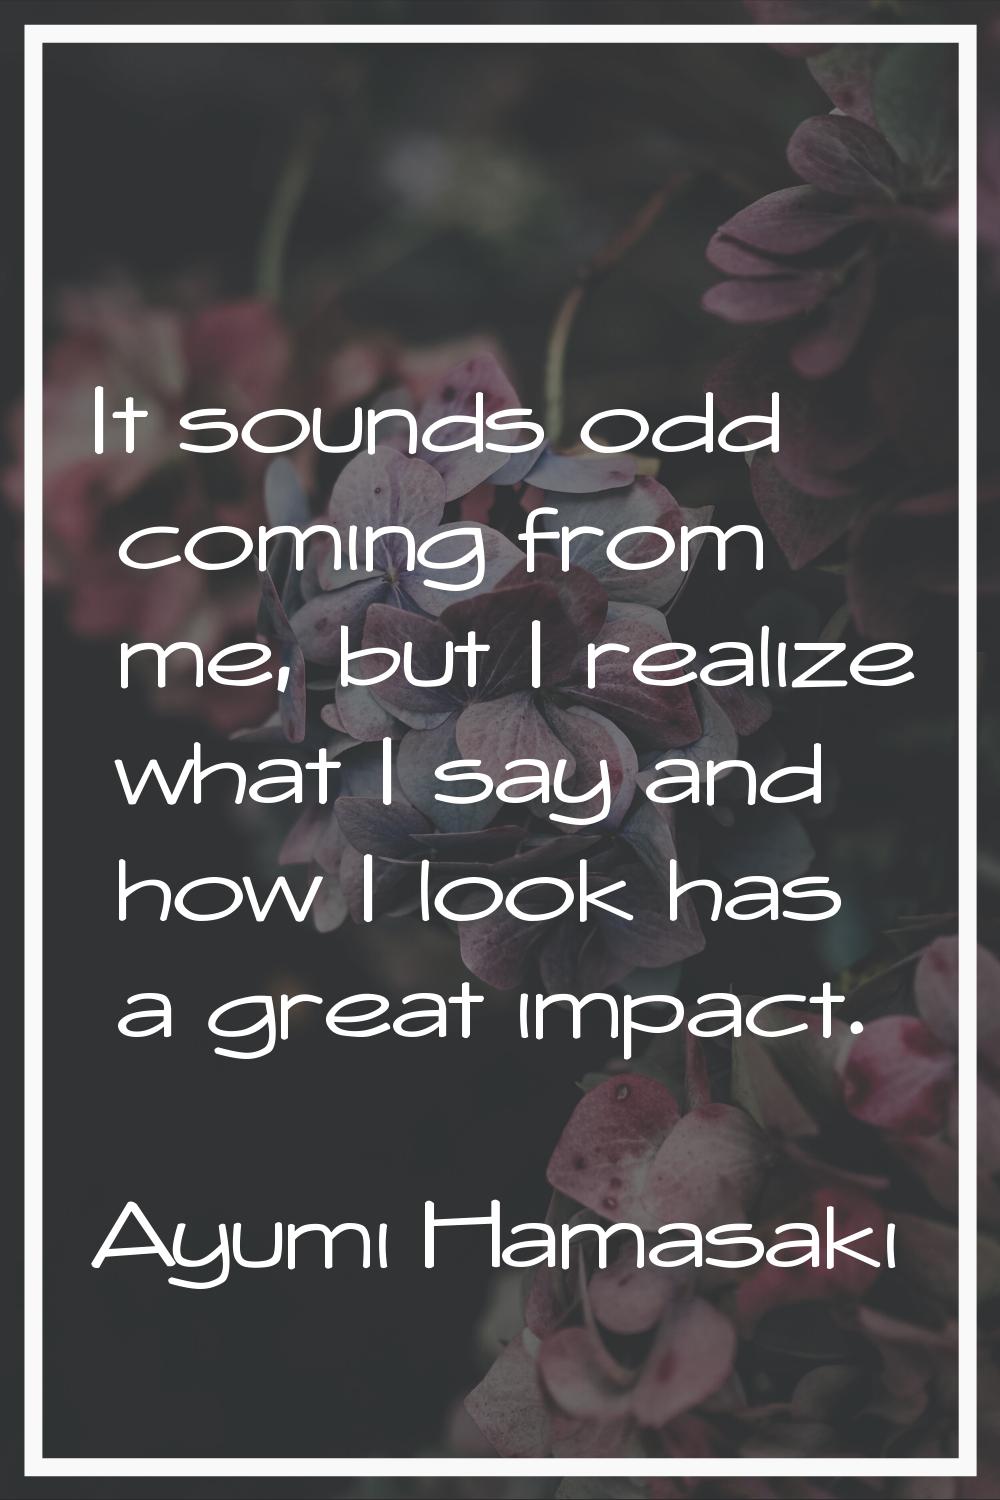 It sounds odd coming from me, but I realize what I say and how I look has a great impact.